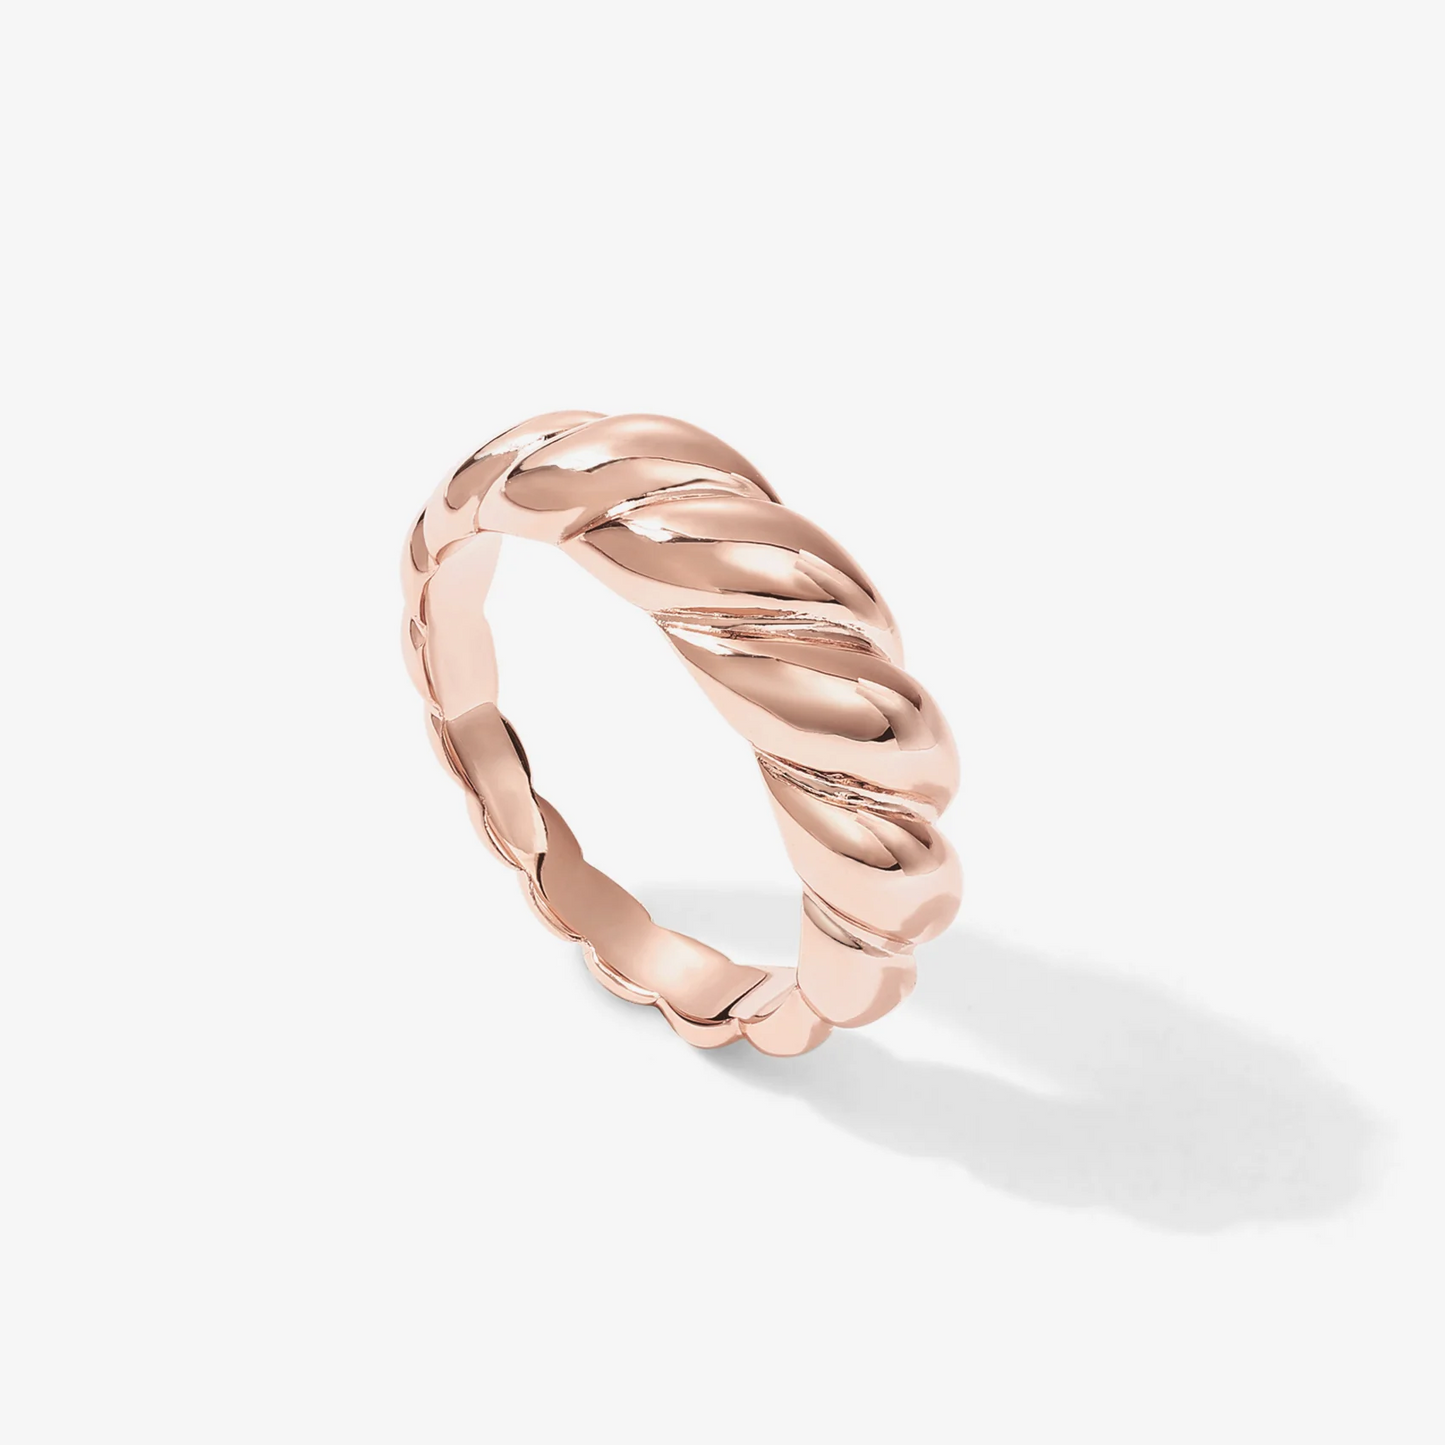 Croissant Ring Gift for Her